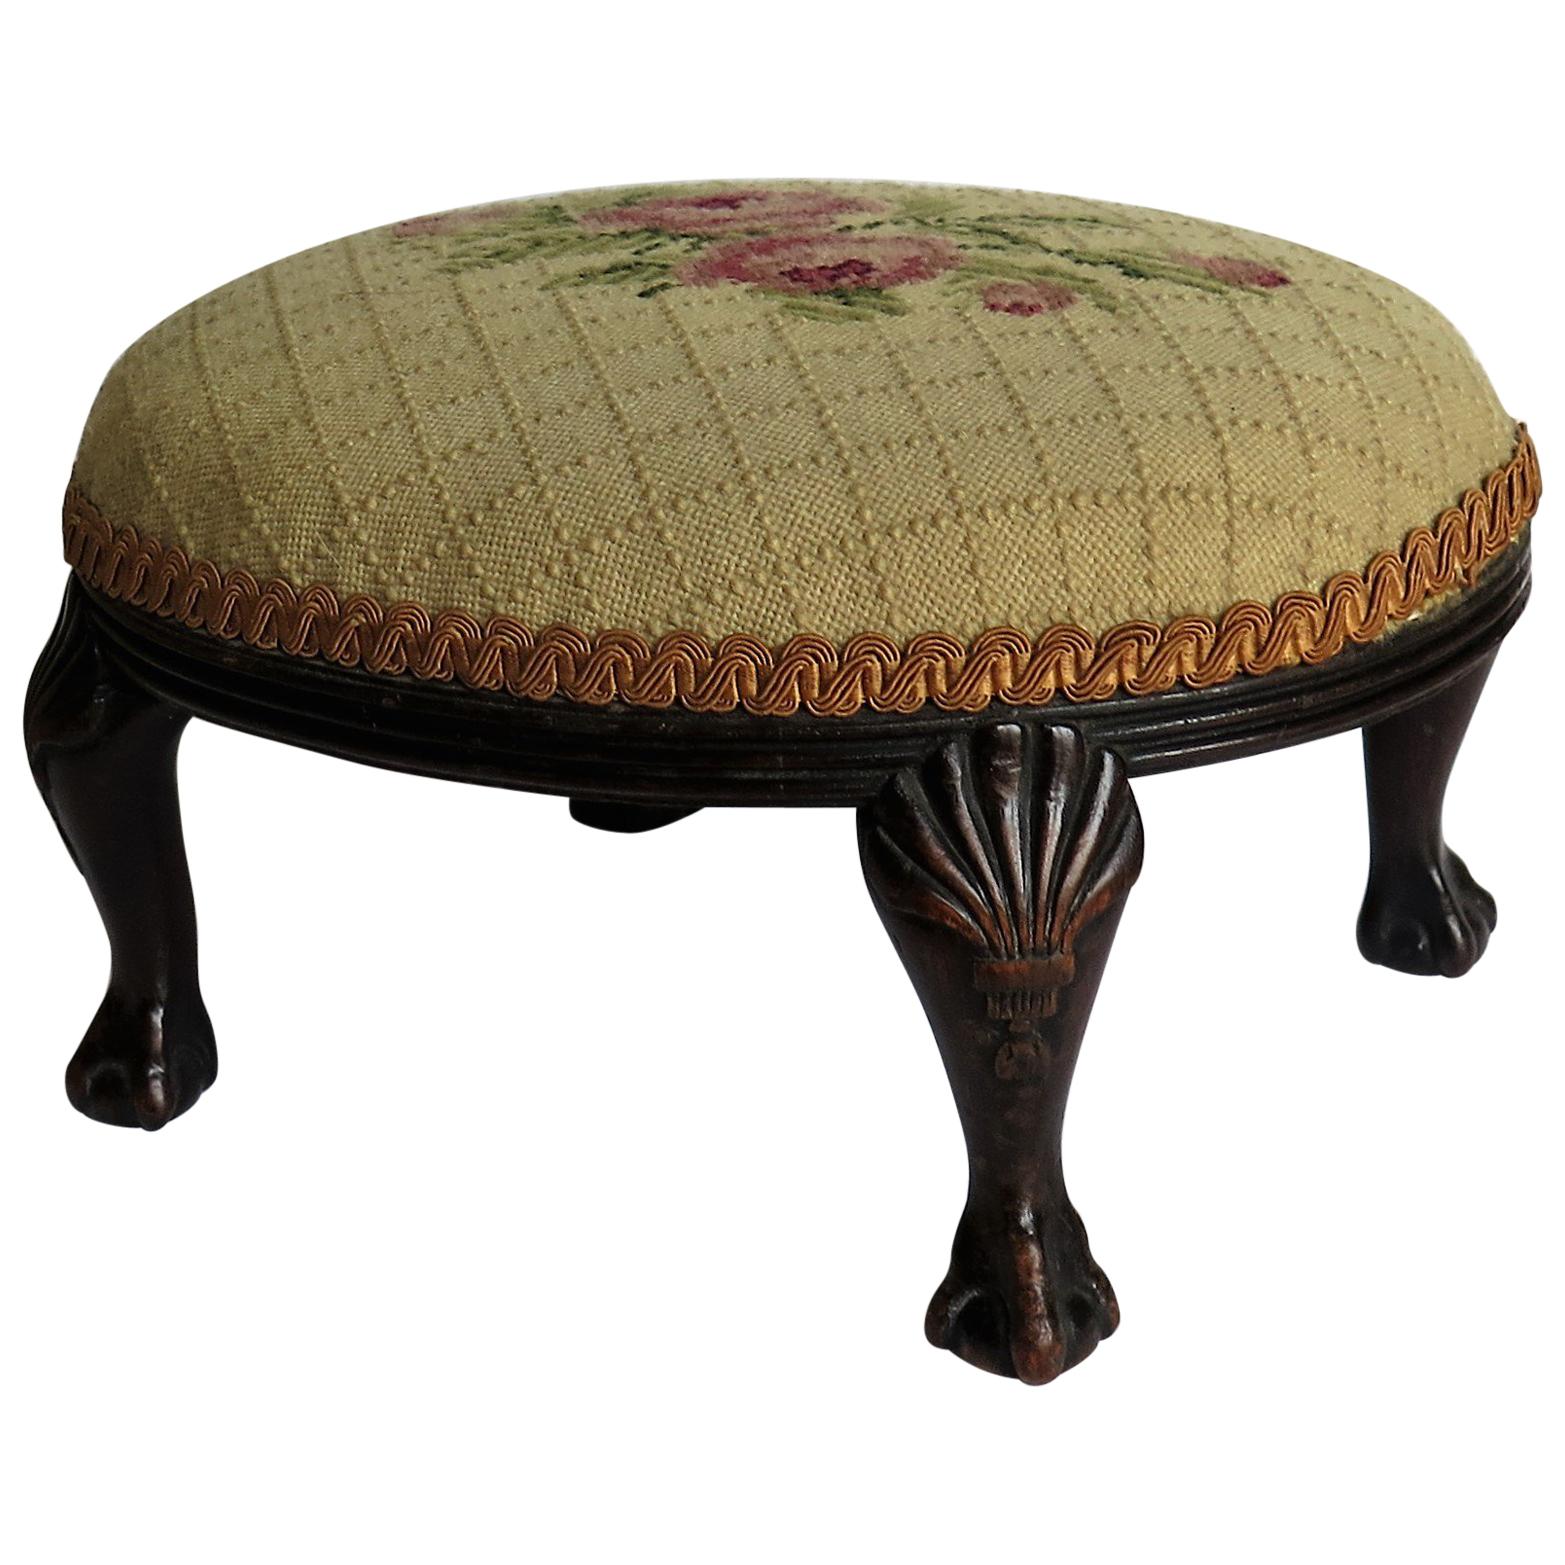 Late Georgian Footstool Carved Shell Ball and Claw Legs Needlework Top, Ca. 1820